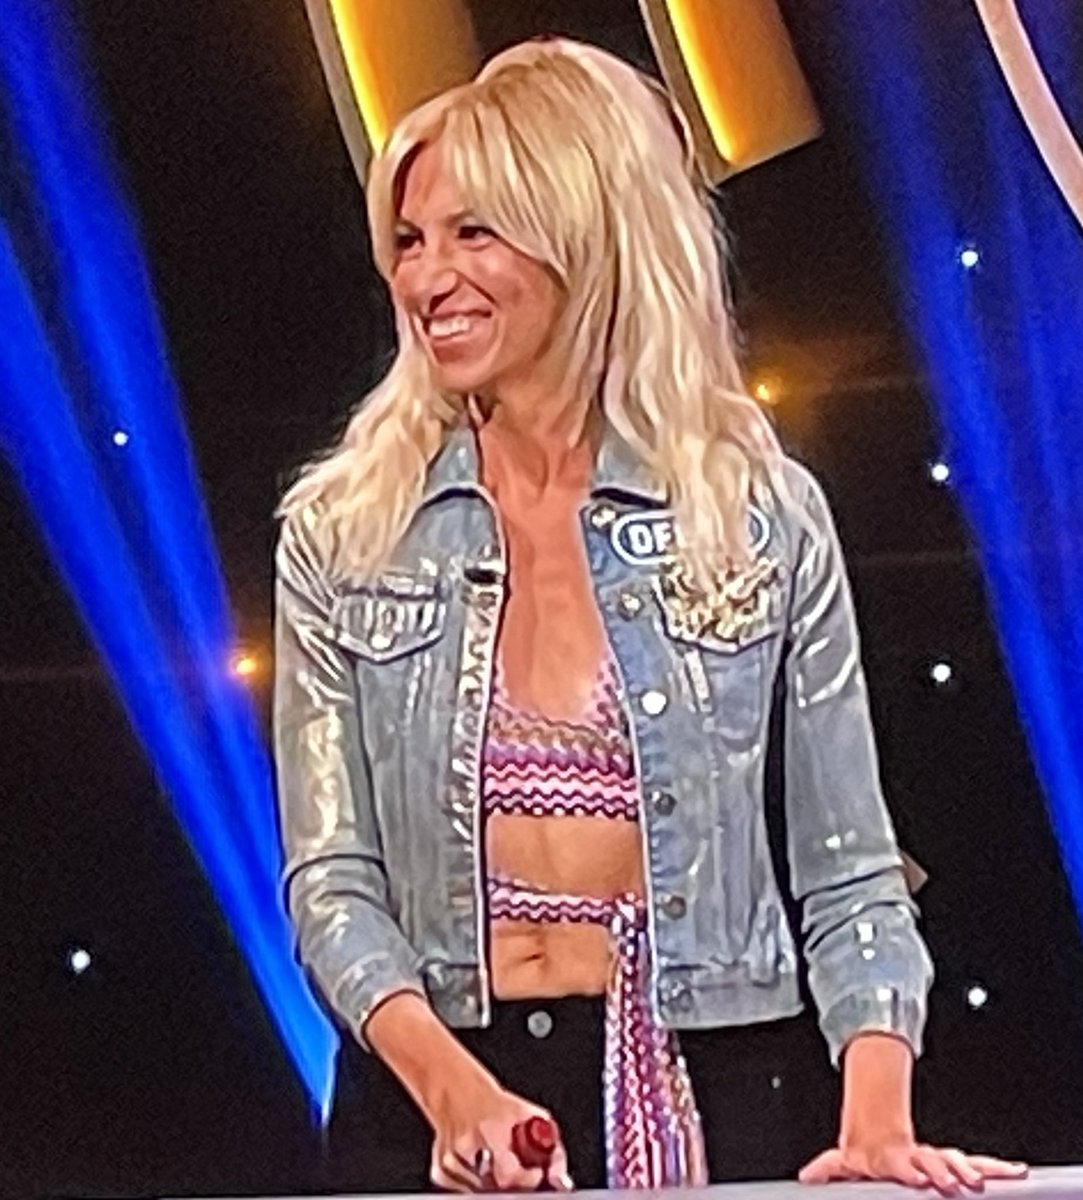 Sorry, Debbie Gibson. You look great, but this outfit does not work for a 53-year-old.  #celebritywheeloffortune